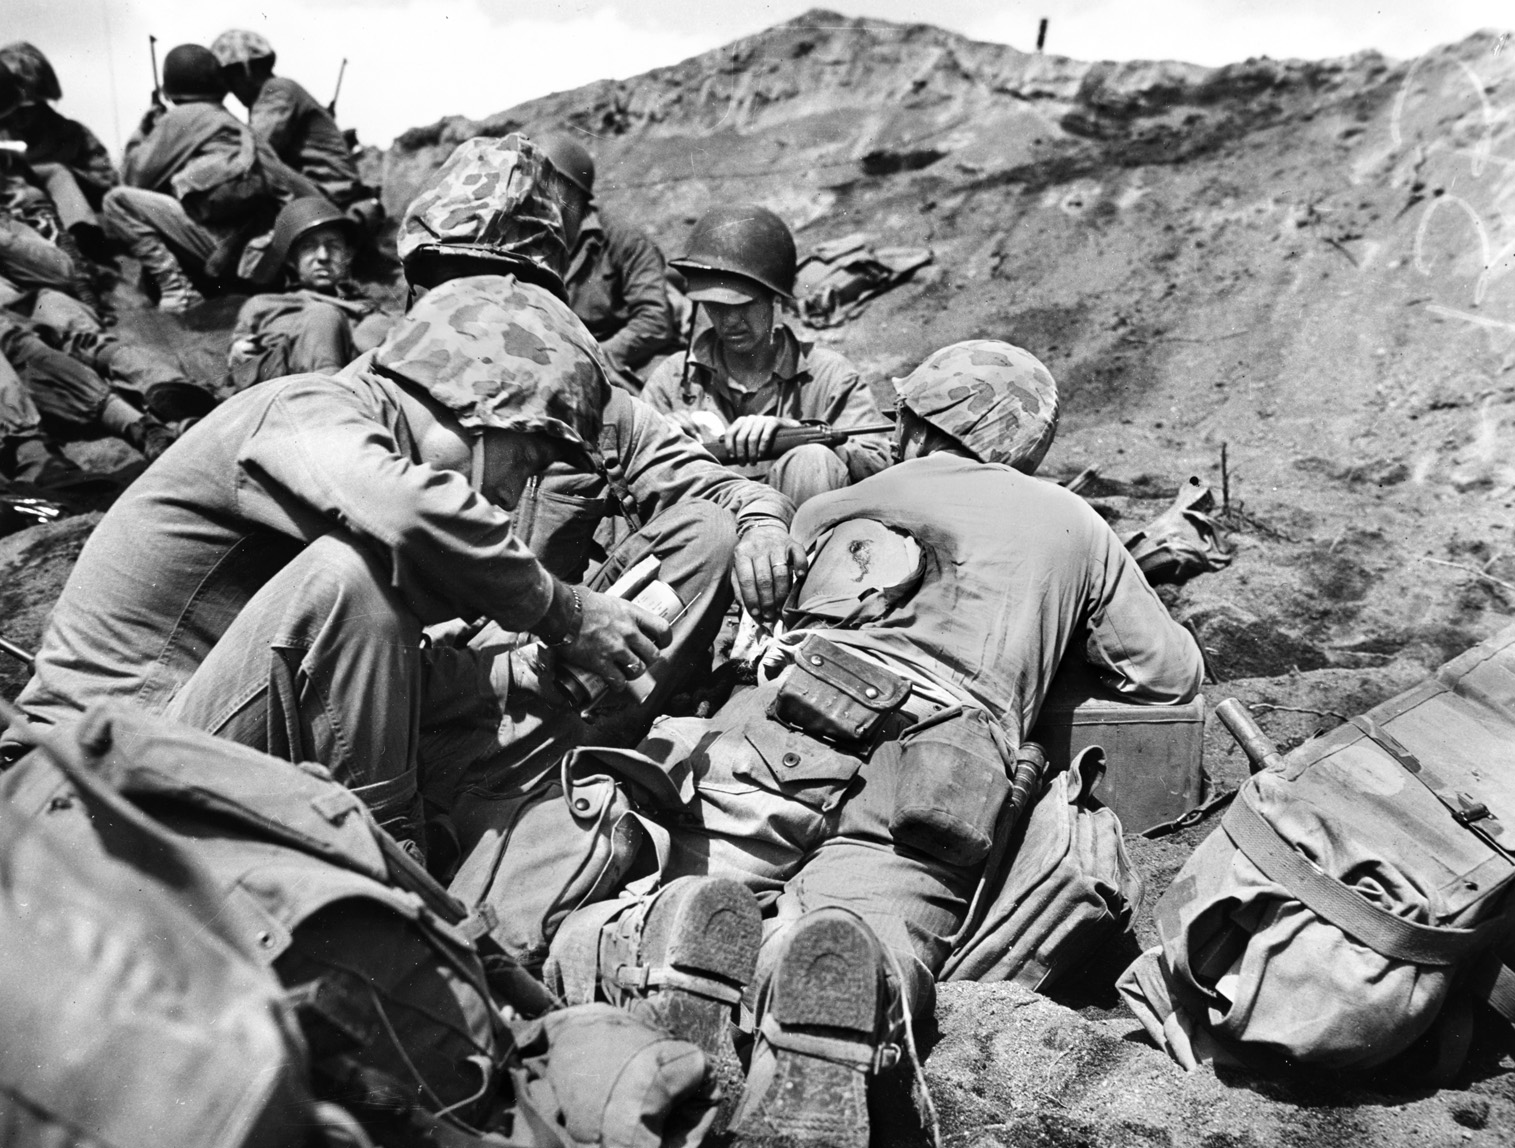 A Navy corpsman dresses the wound of a Marine who has been hit in the back while fighting on Iwo Jima. Kirby suffered a back wound during the fight for Hill 362C but kept fighting.